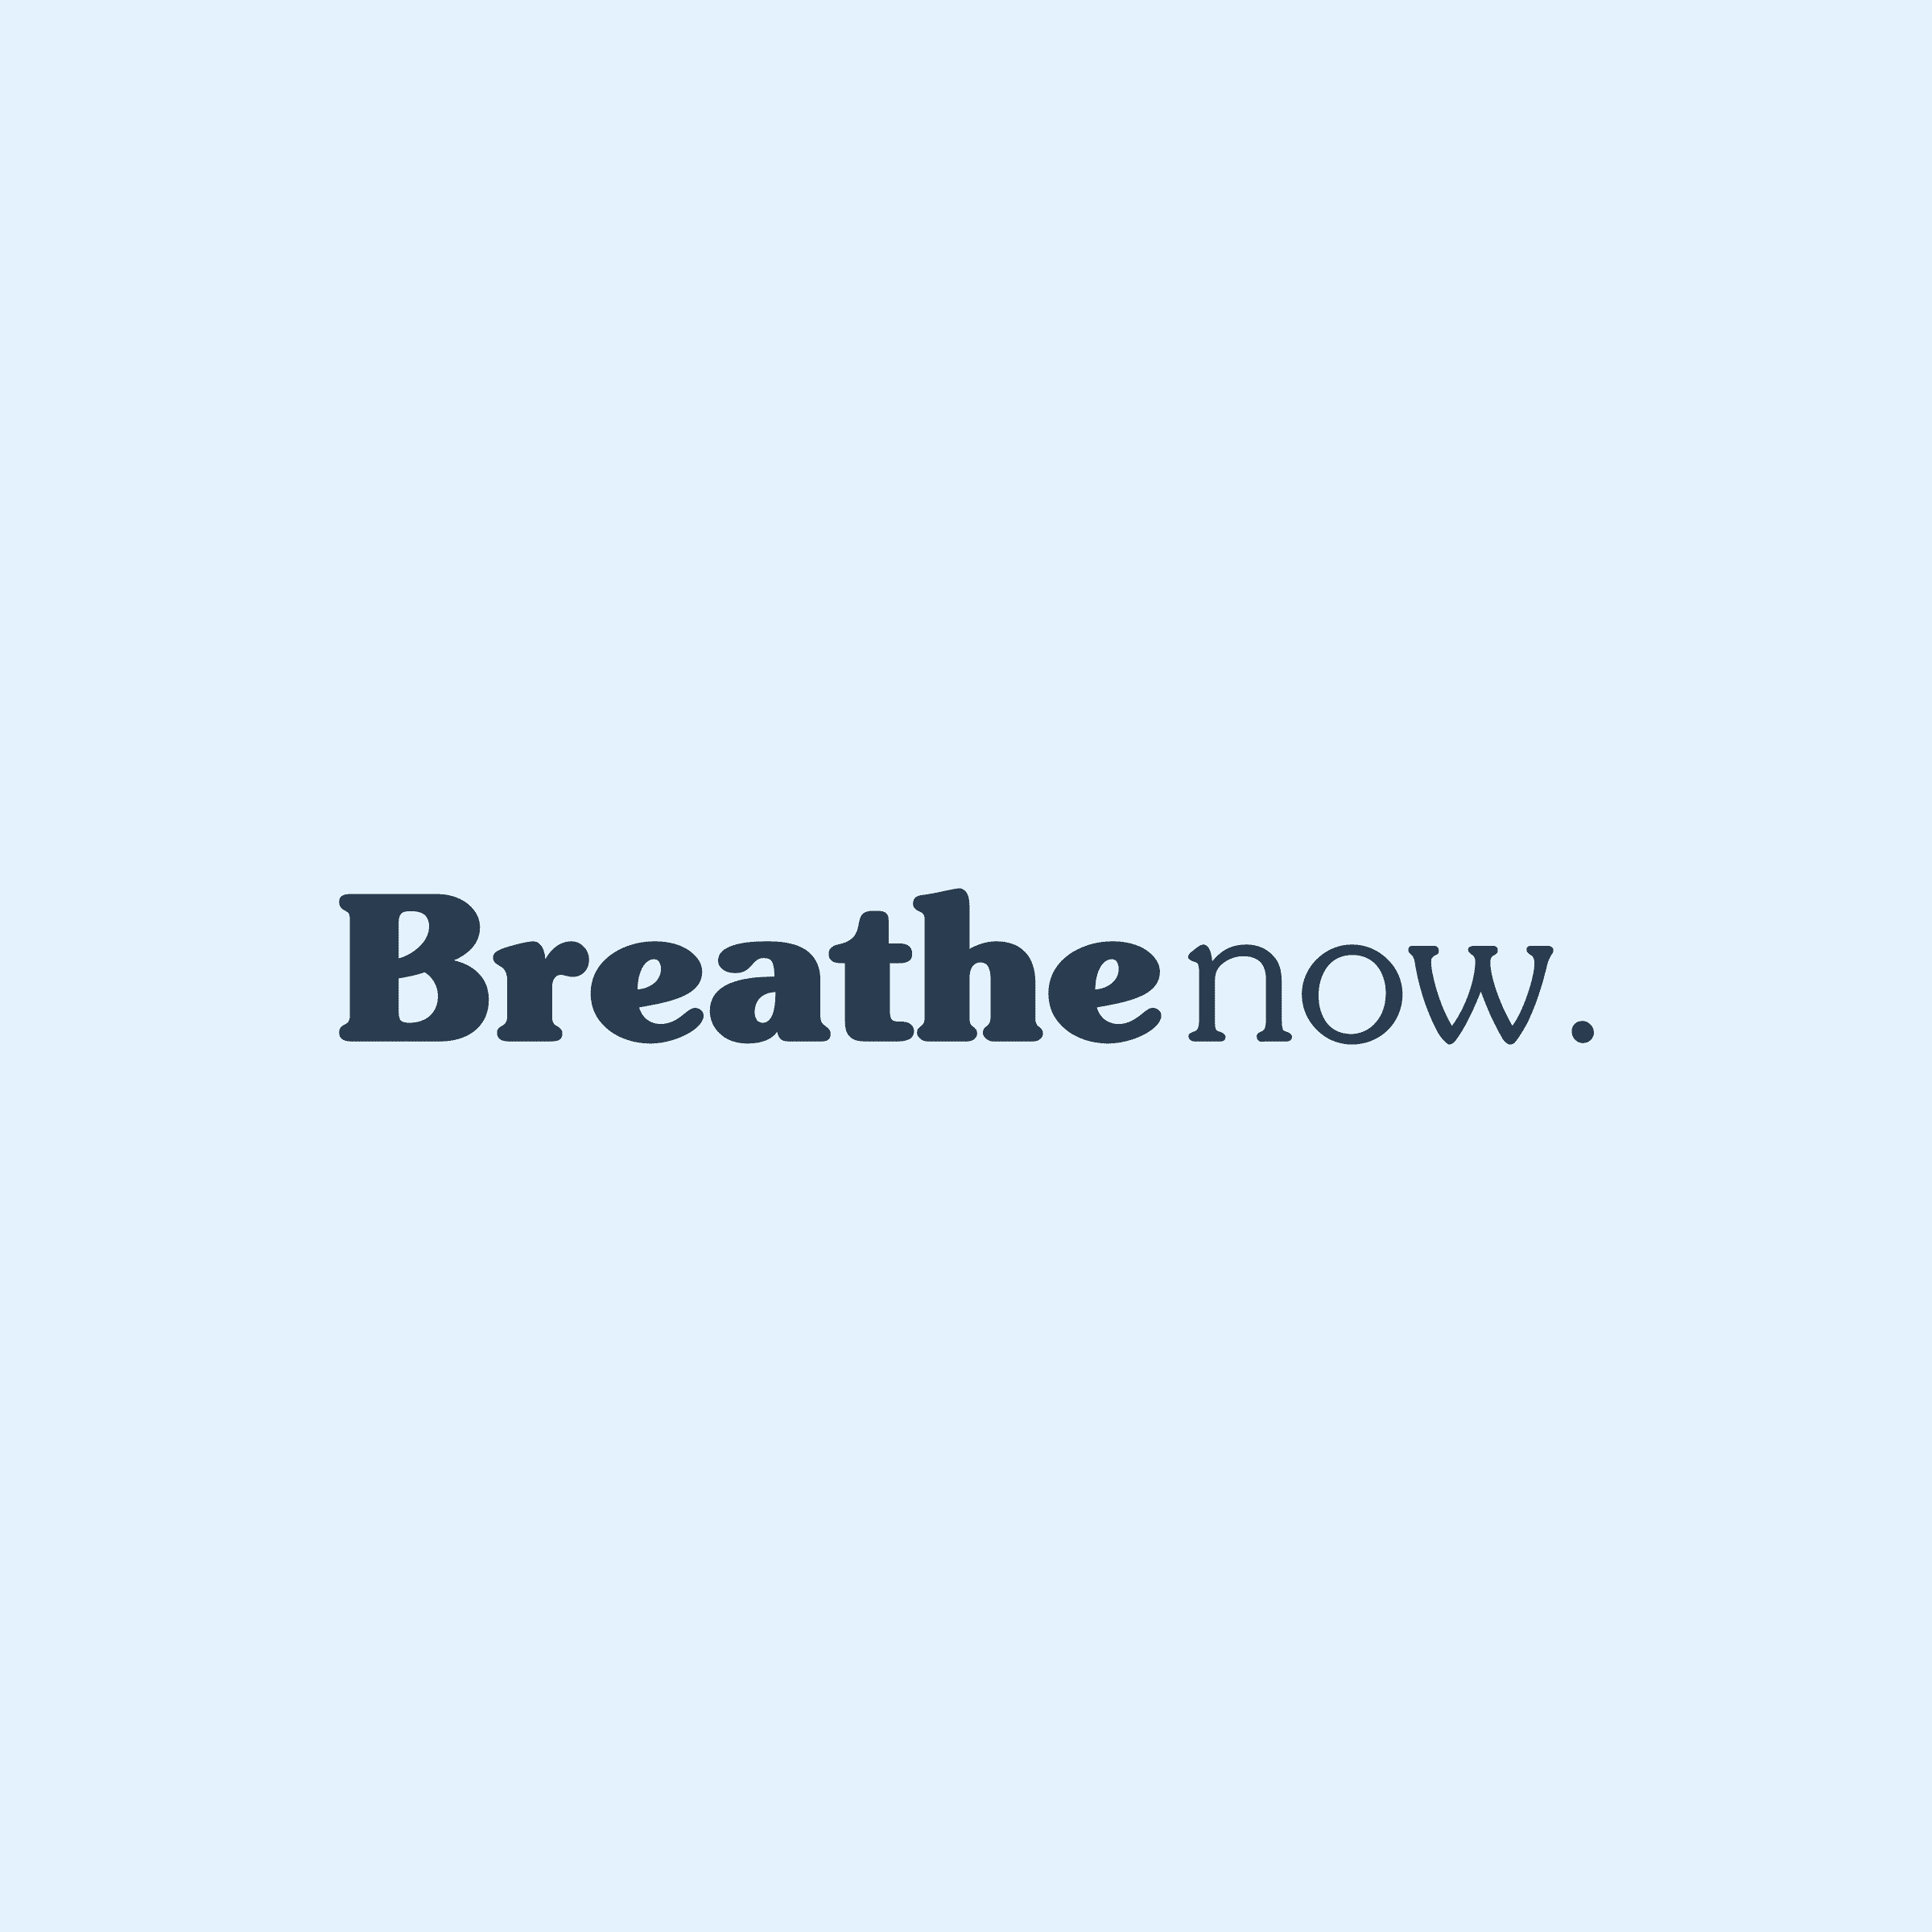 Breathing techniques to manage panic attacks